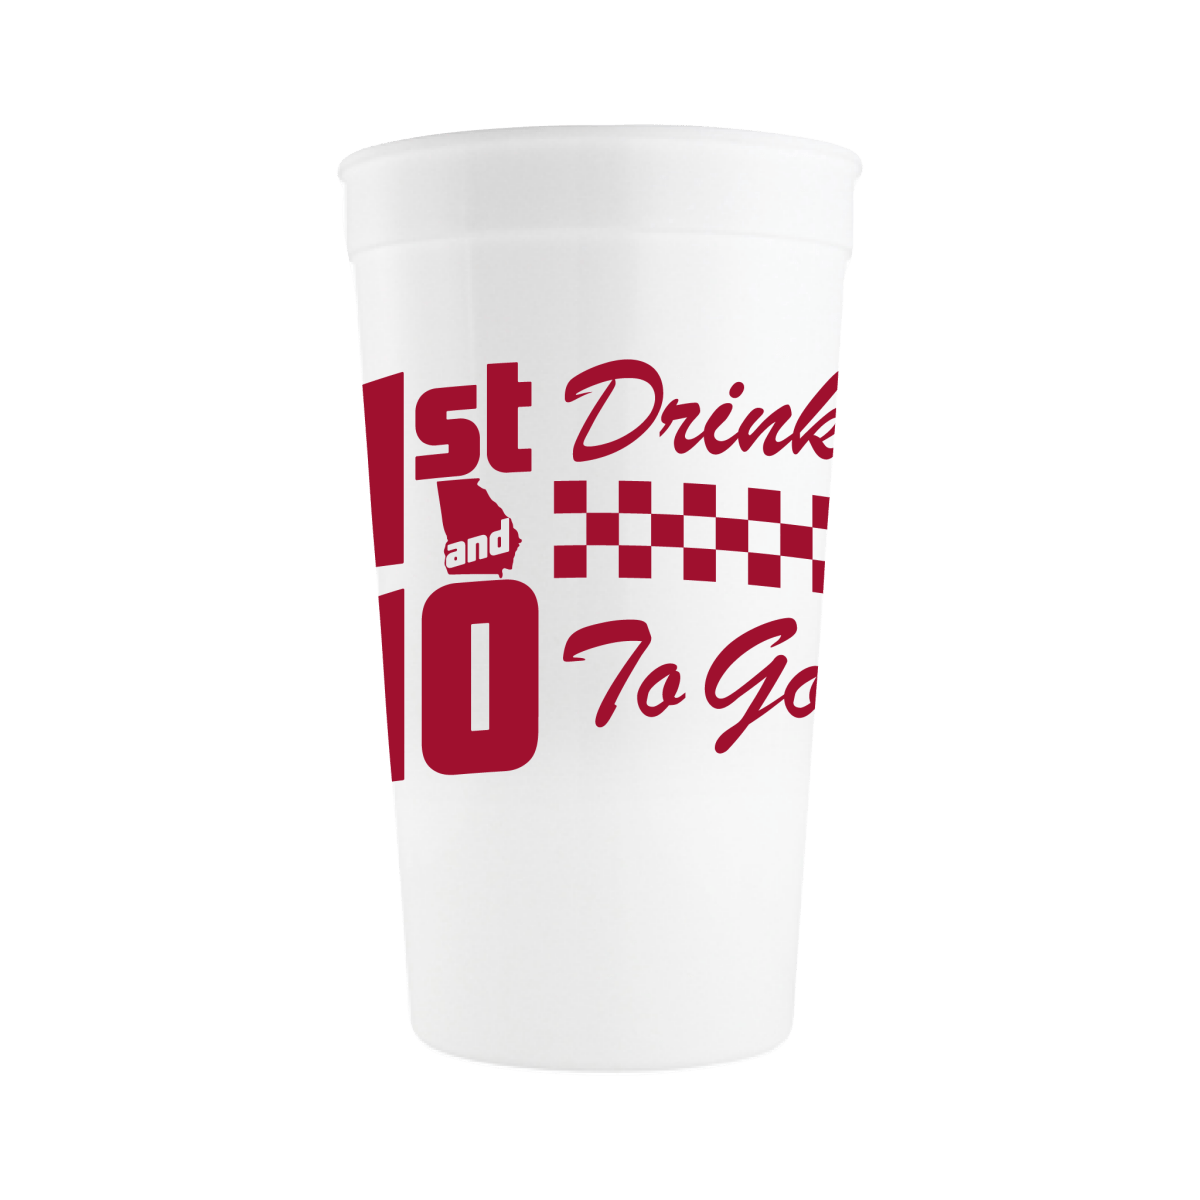 UGA First and Ten Cup - Shop B-Unlimited